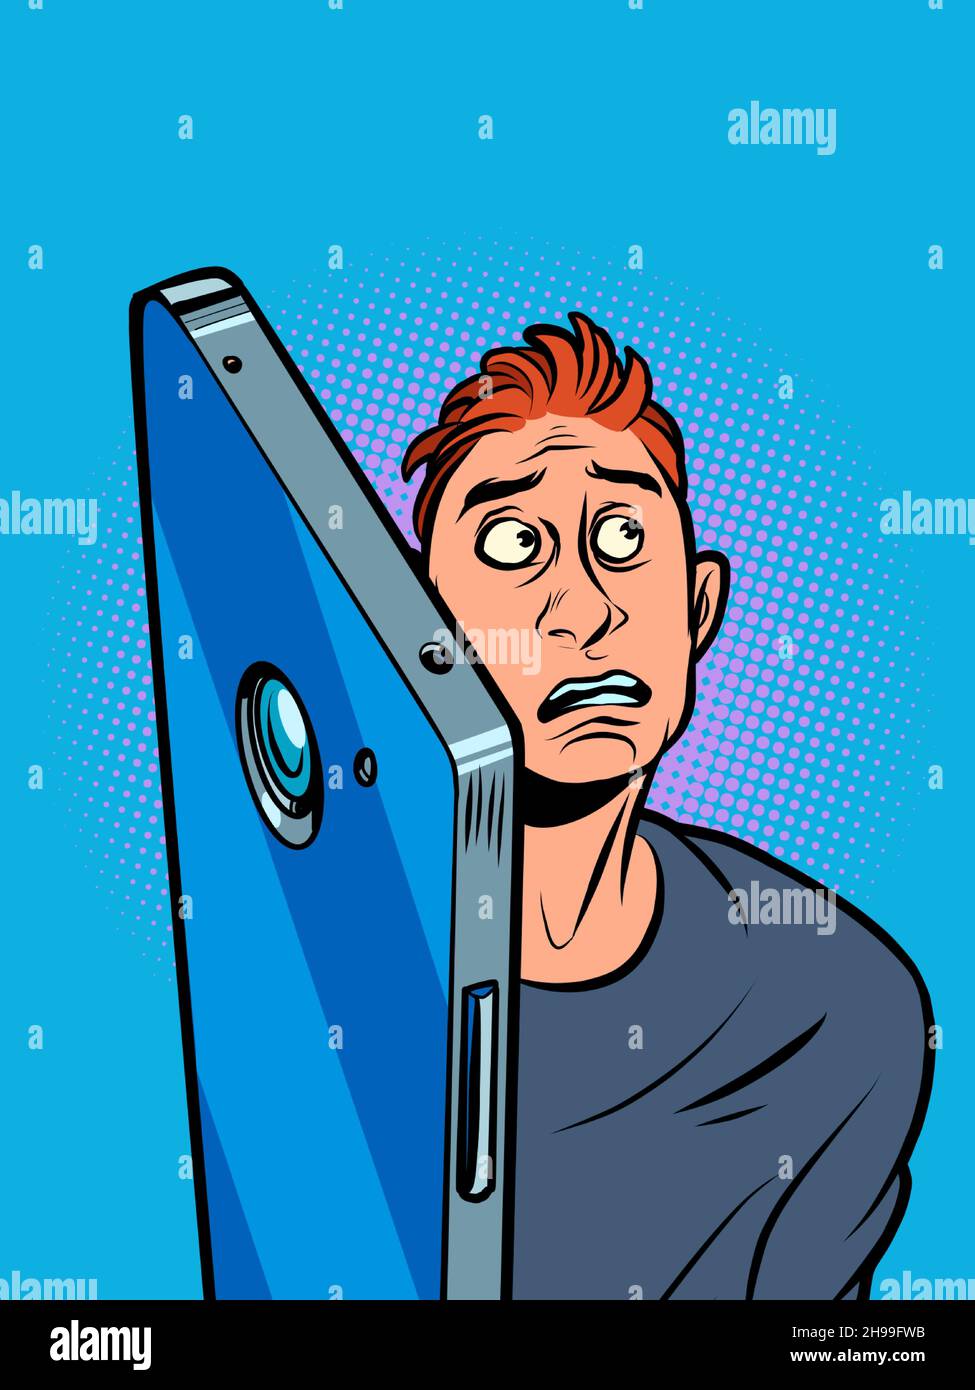 Anxious waiting for a message or call. A man near a smartphone Stock Vector